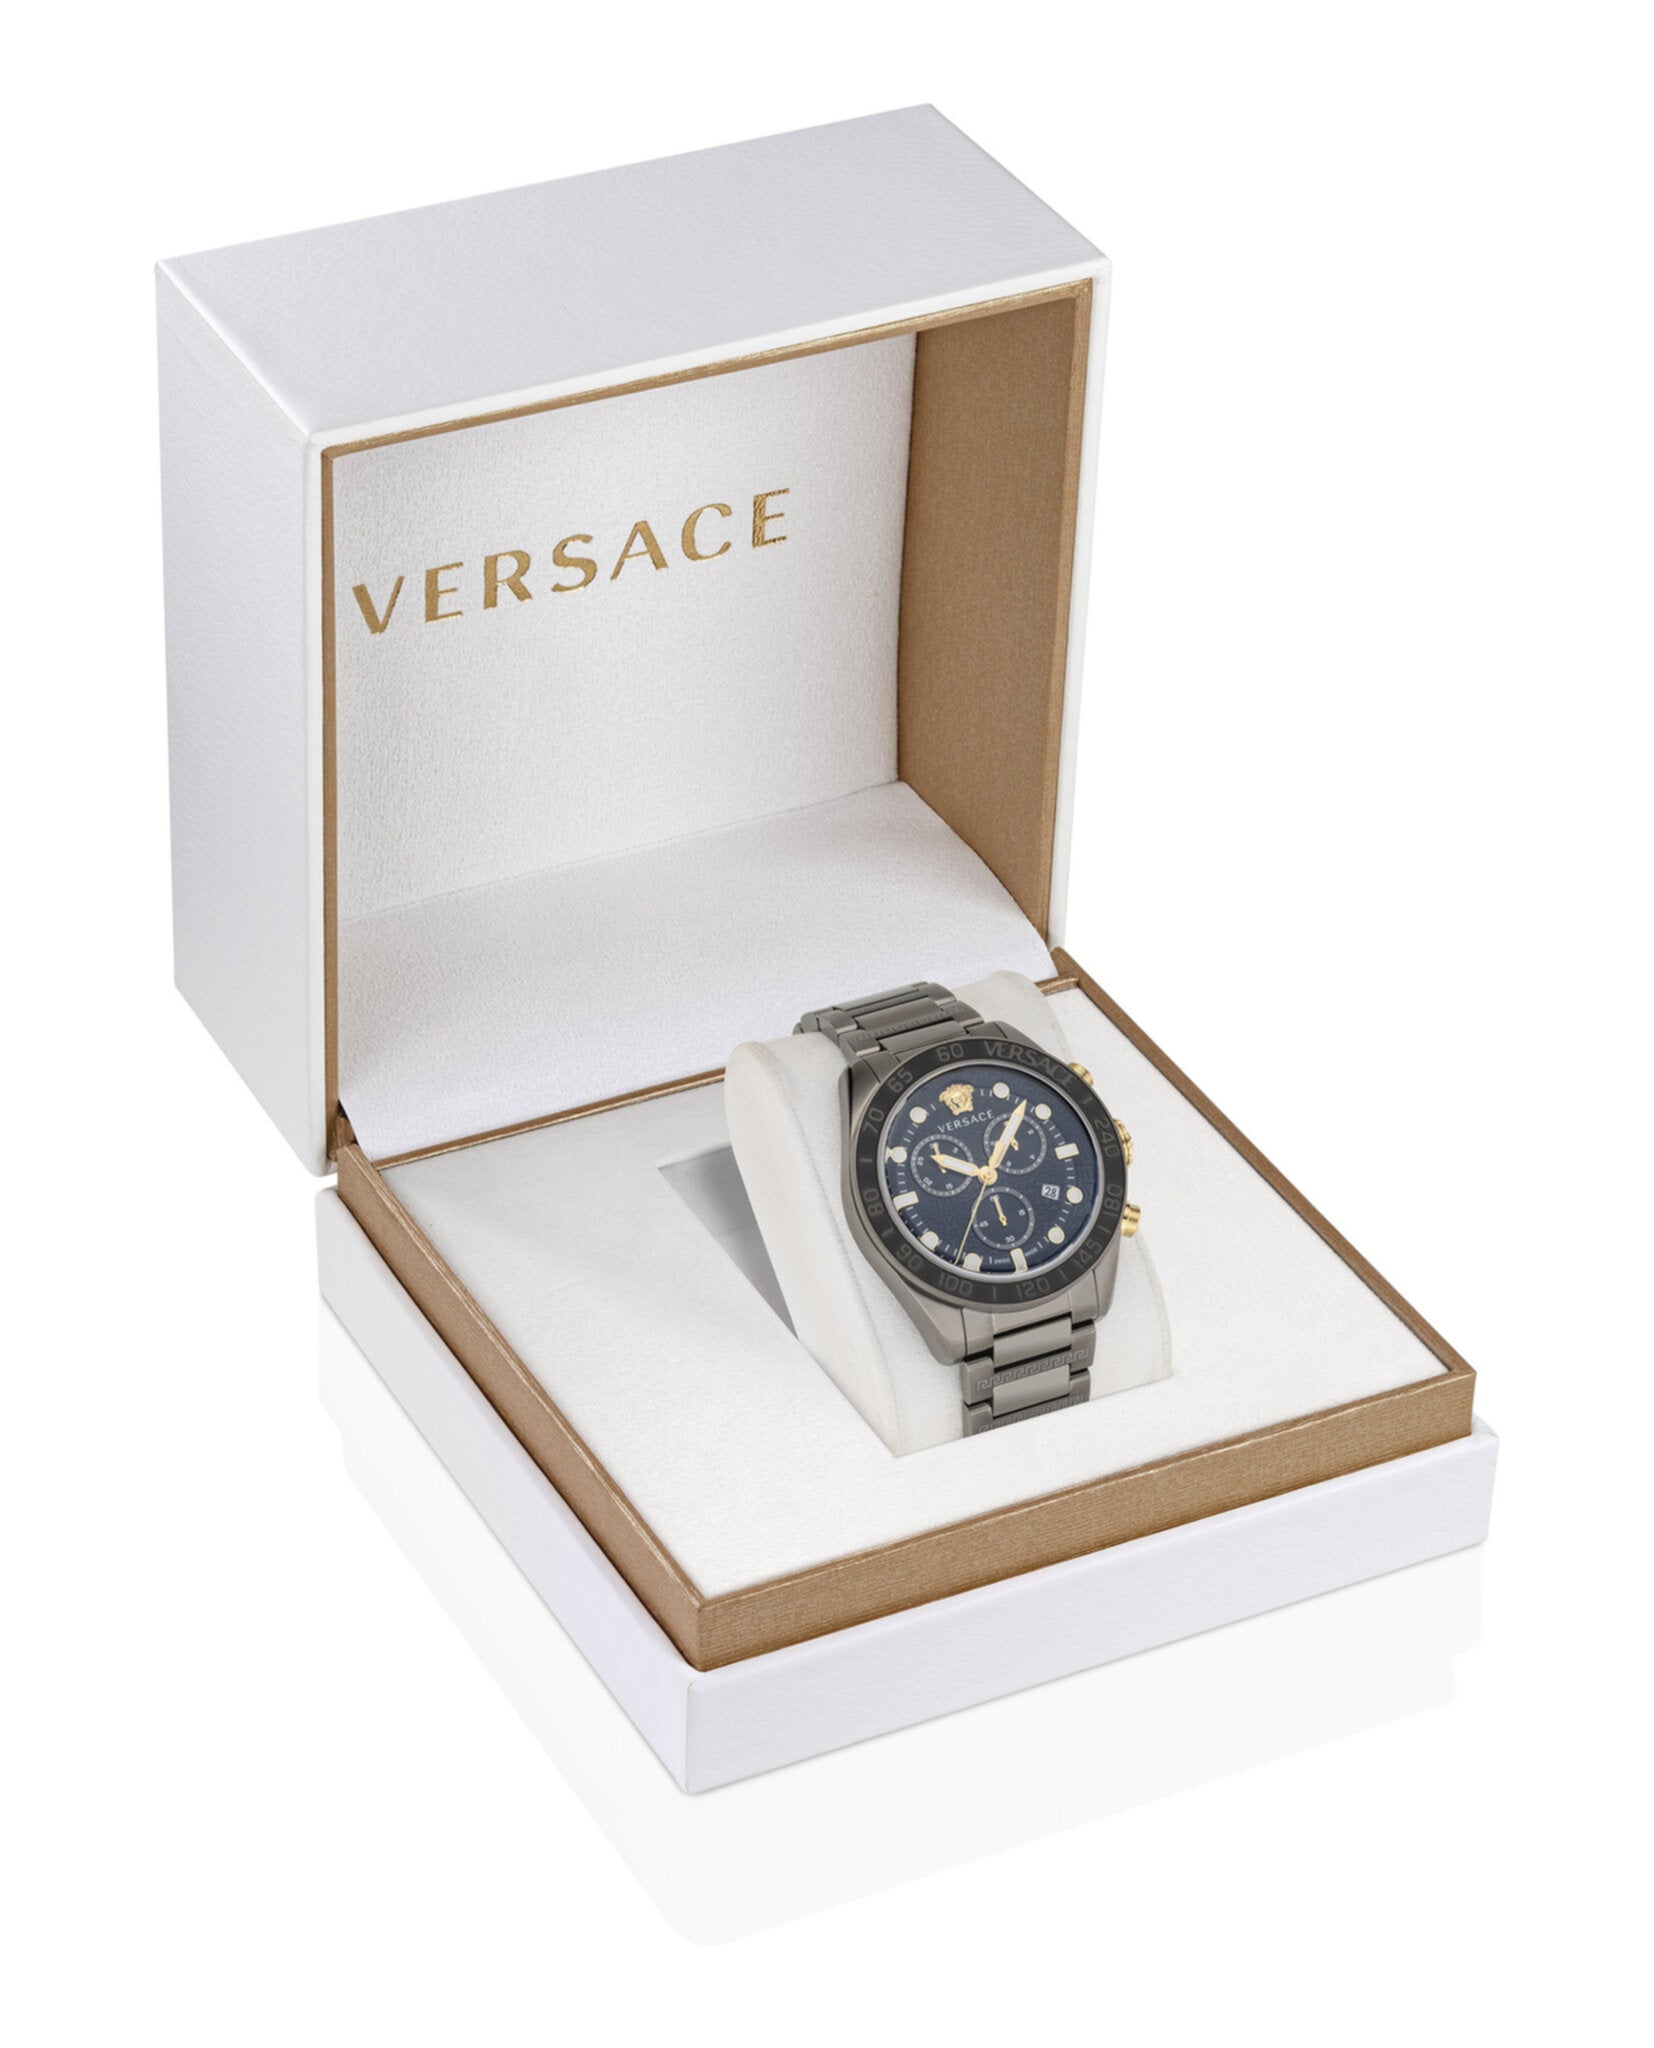 Greca Mens – Watches Madaluxe Versace Time MadaLuxe | Dome Time